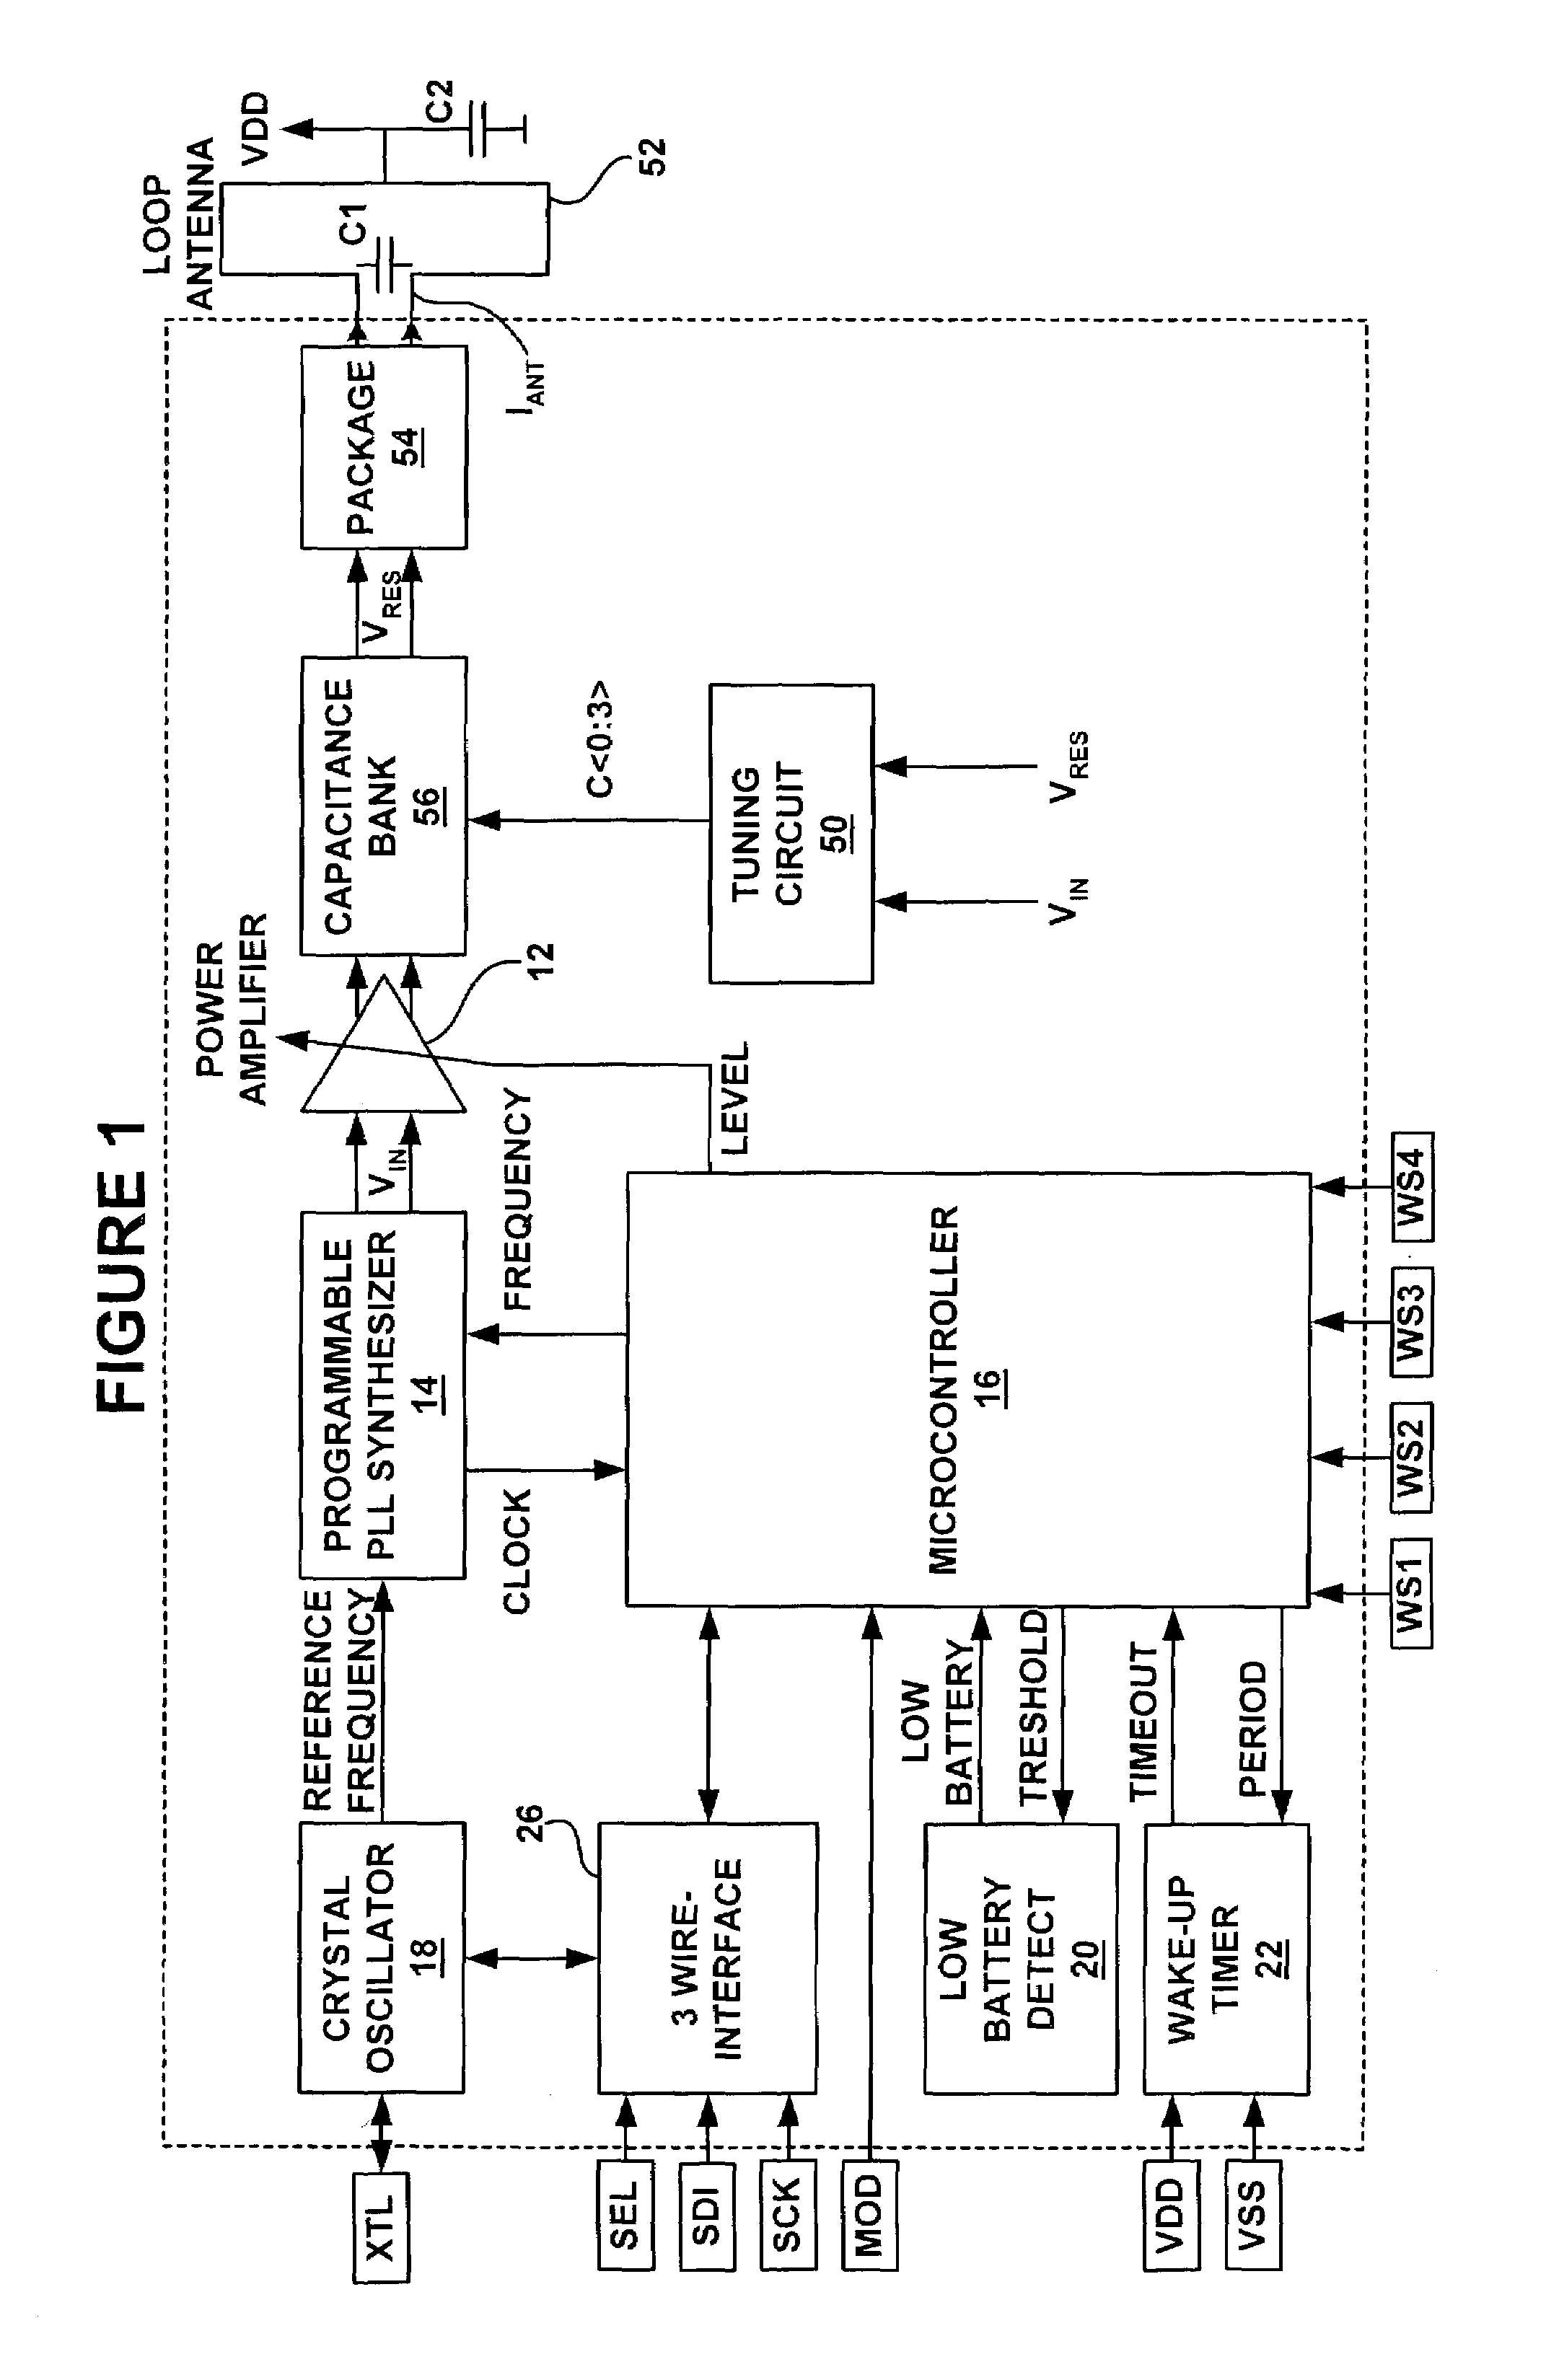 Method and apparatus for automatic tuning of a resonant loop antenna